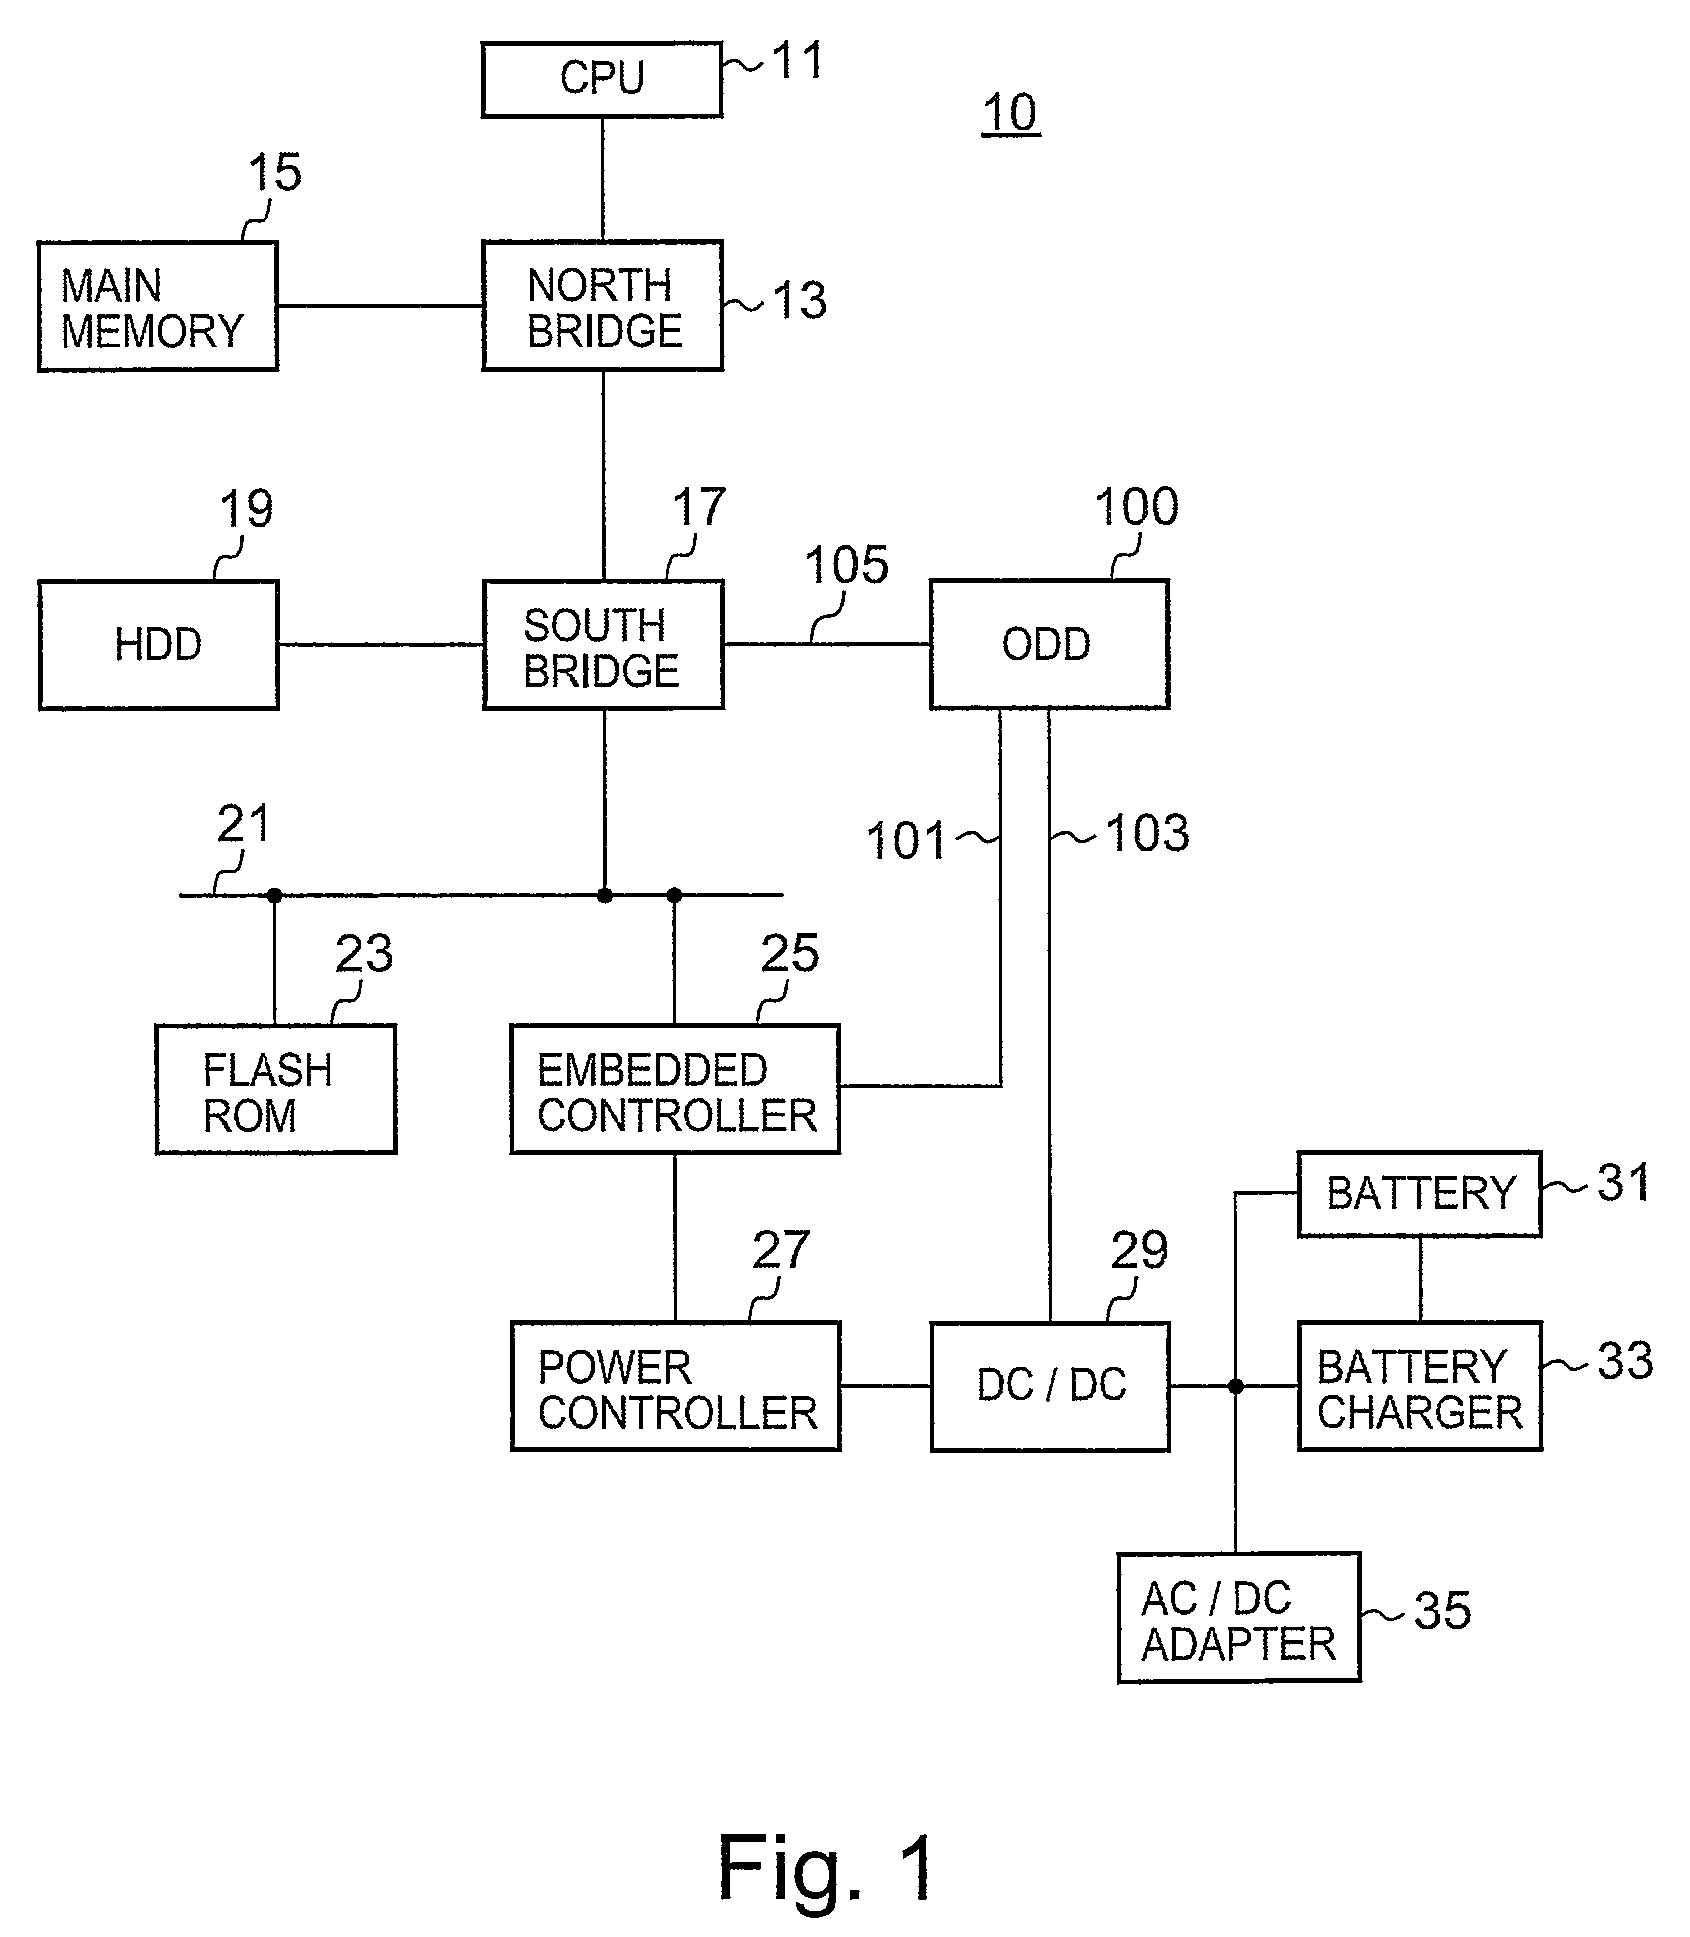 Notebook optical disc drive capable of generating a pseudo eject signal